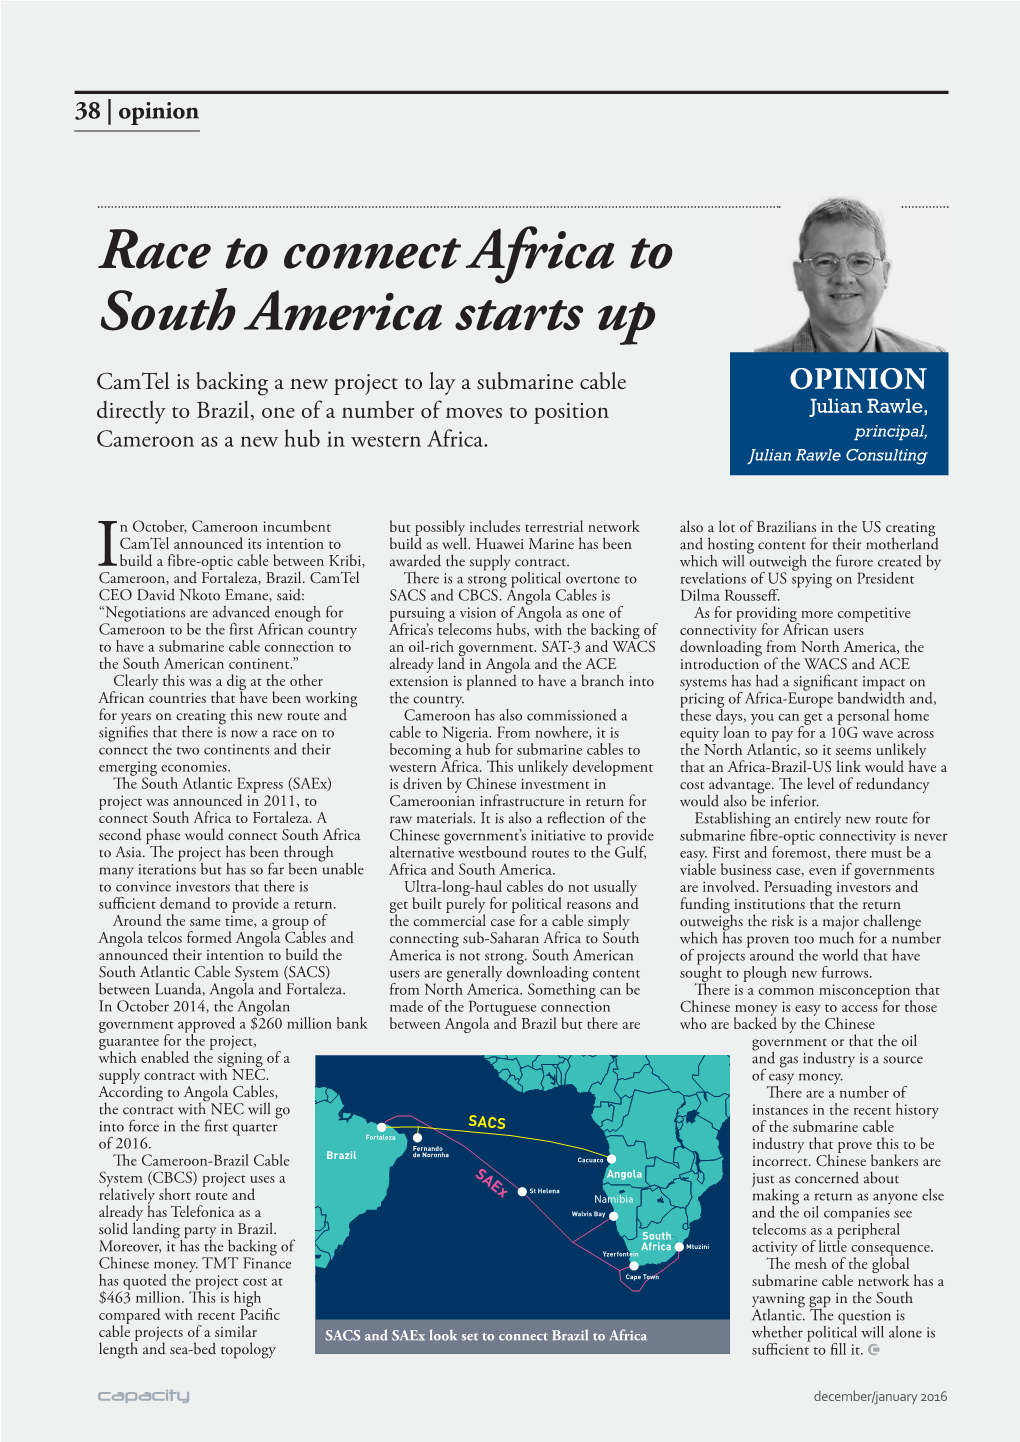 Race to Connect Africa to South America Starts Up